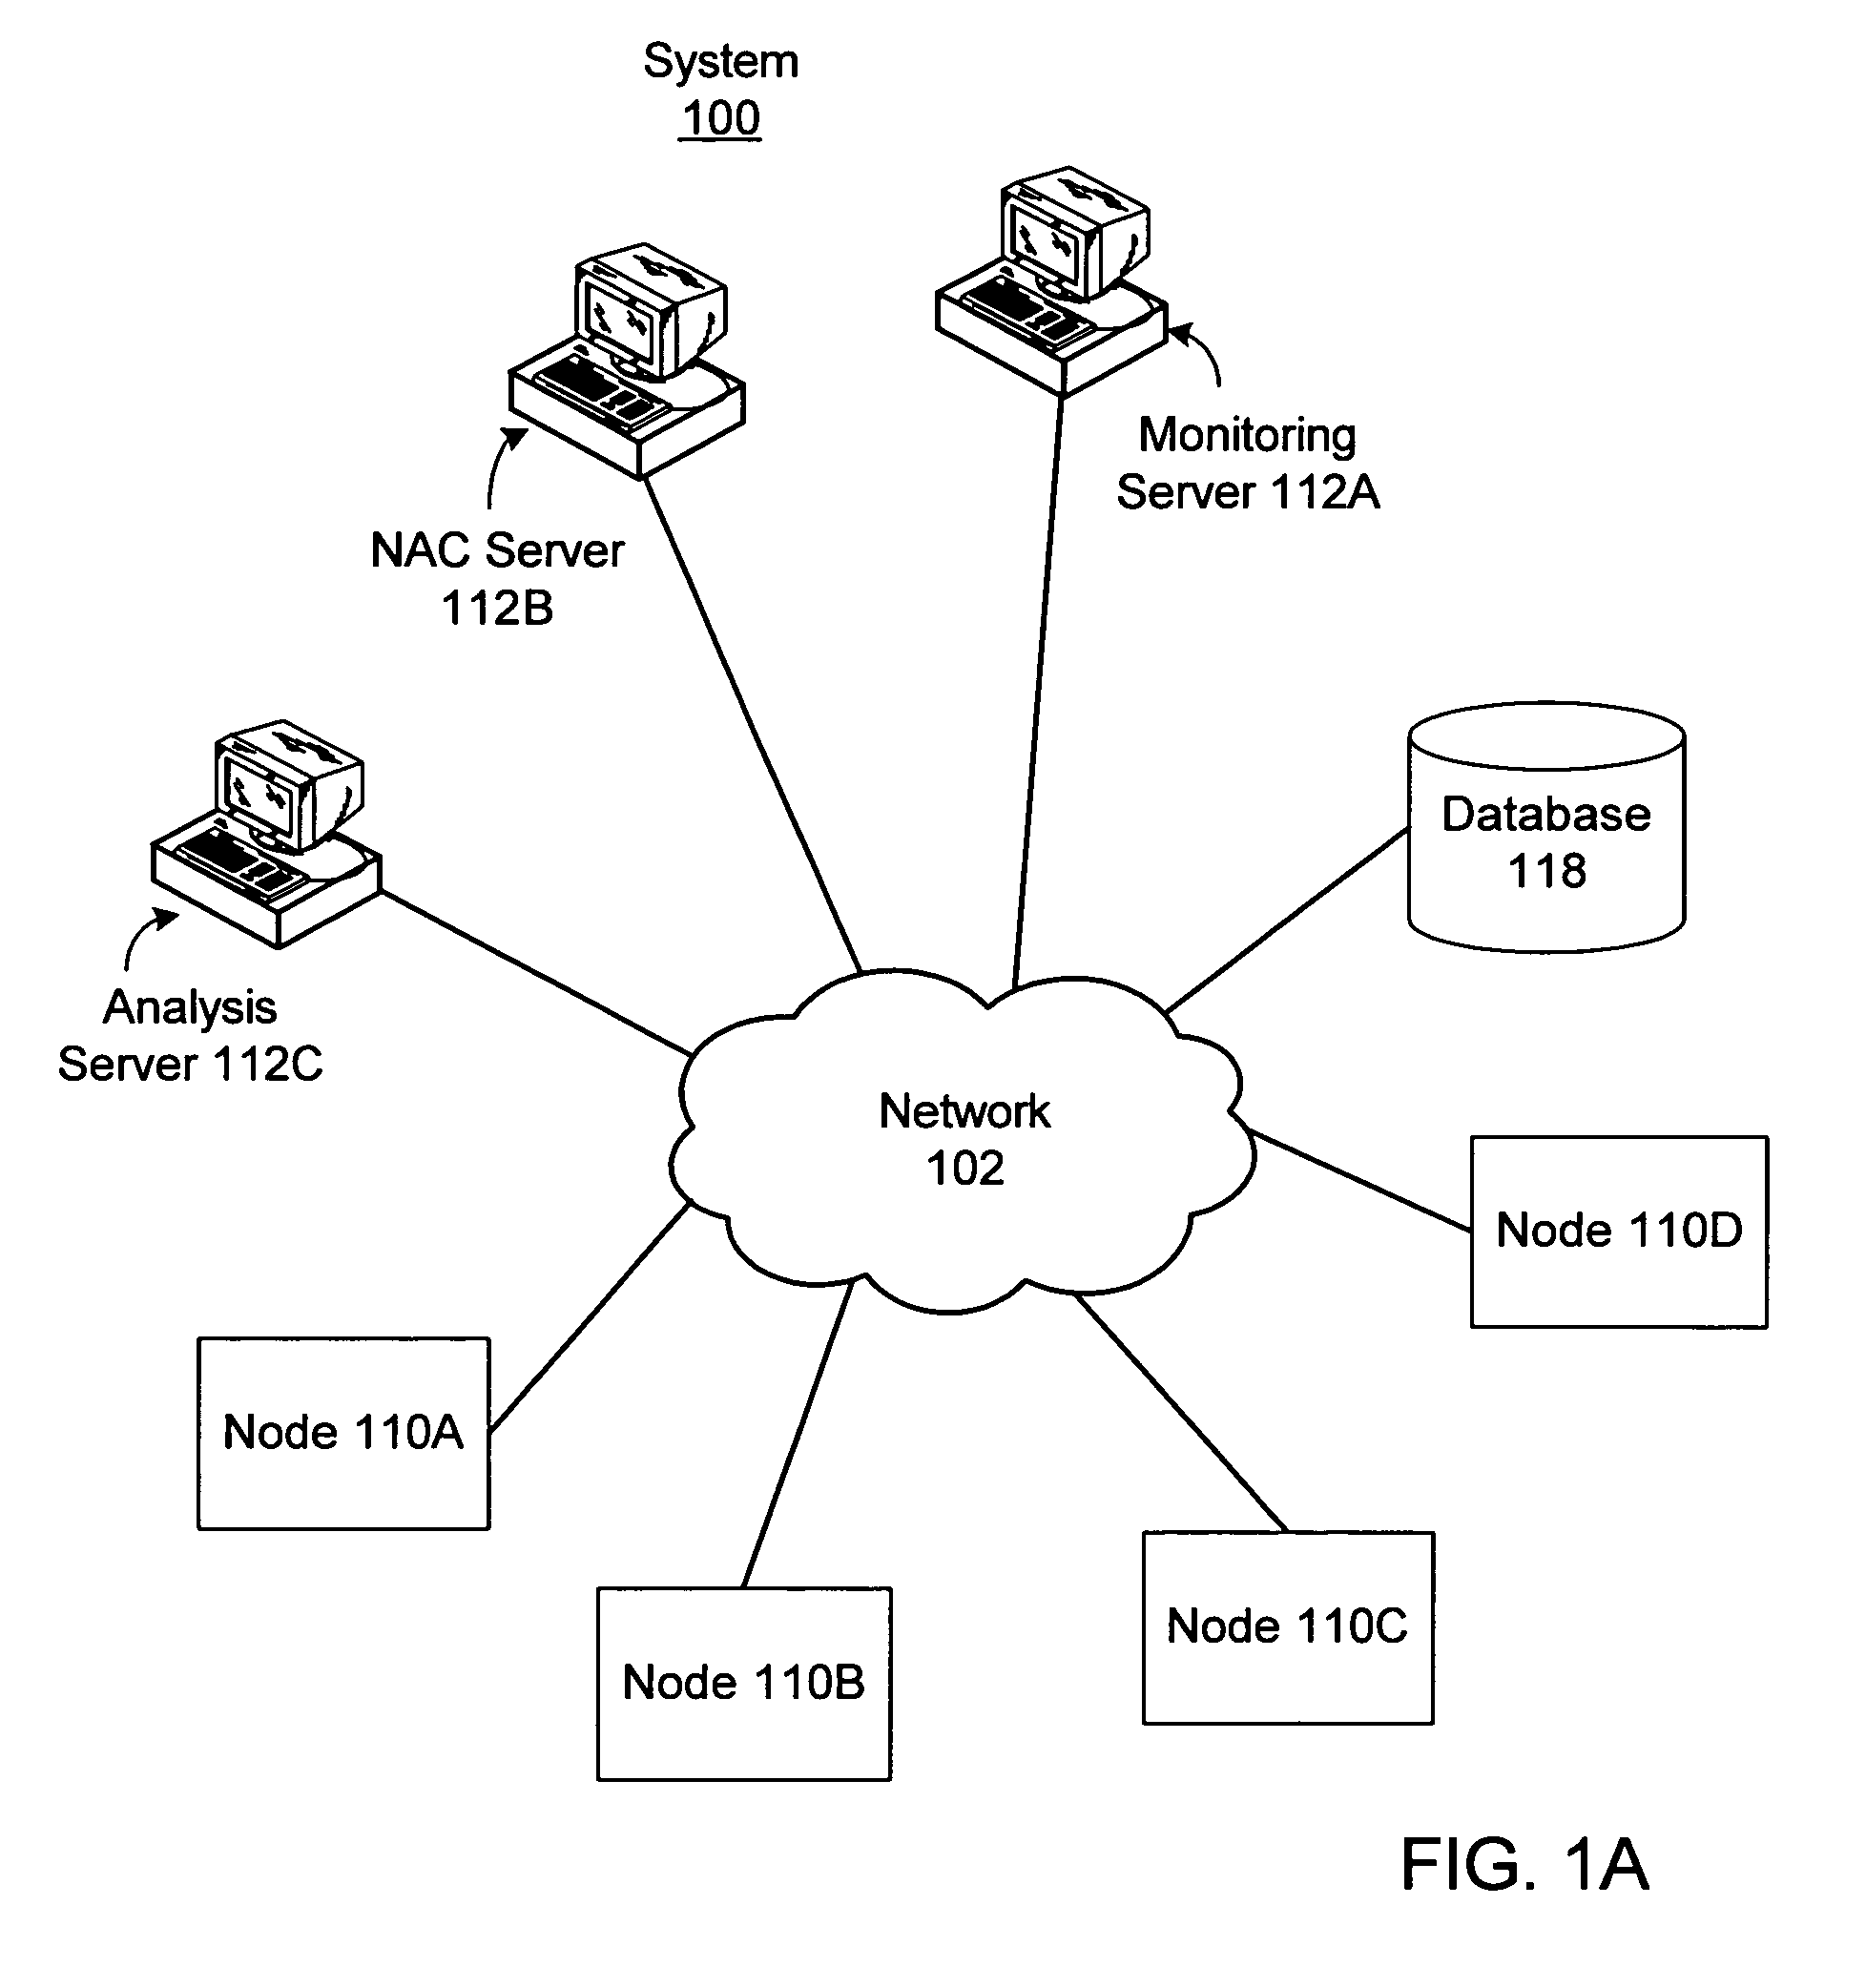 System analyzing configuration fingerprints of network nodes for granting network access and detecting security threat